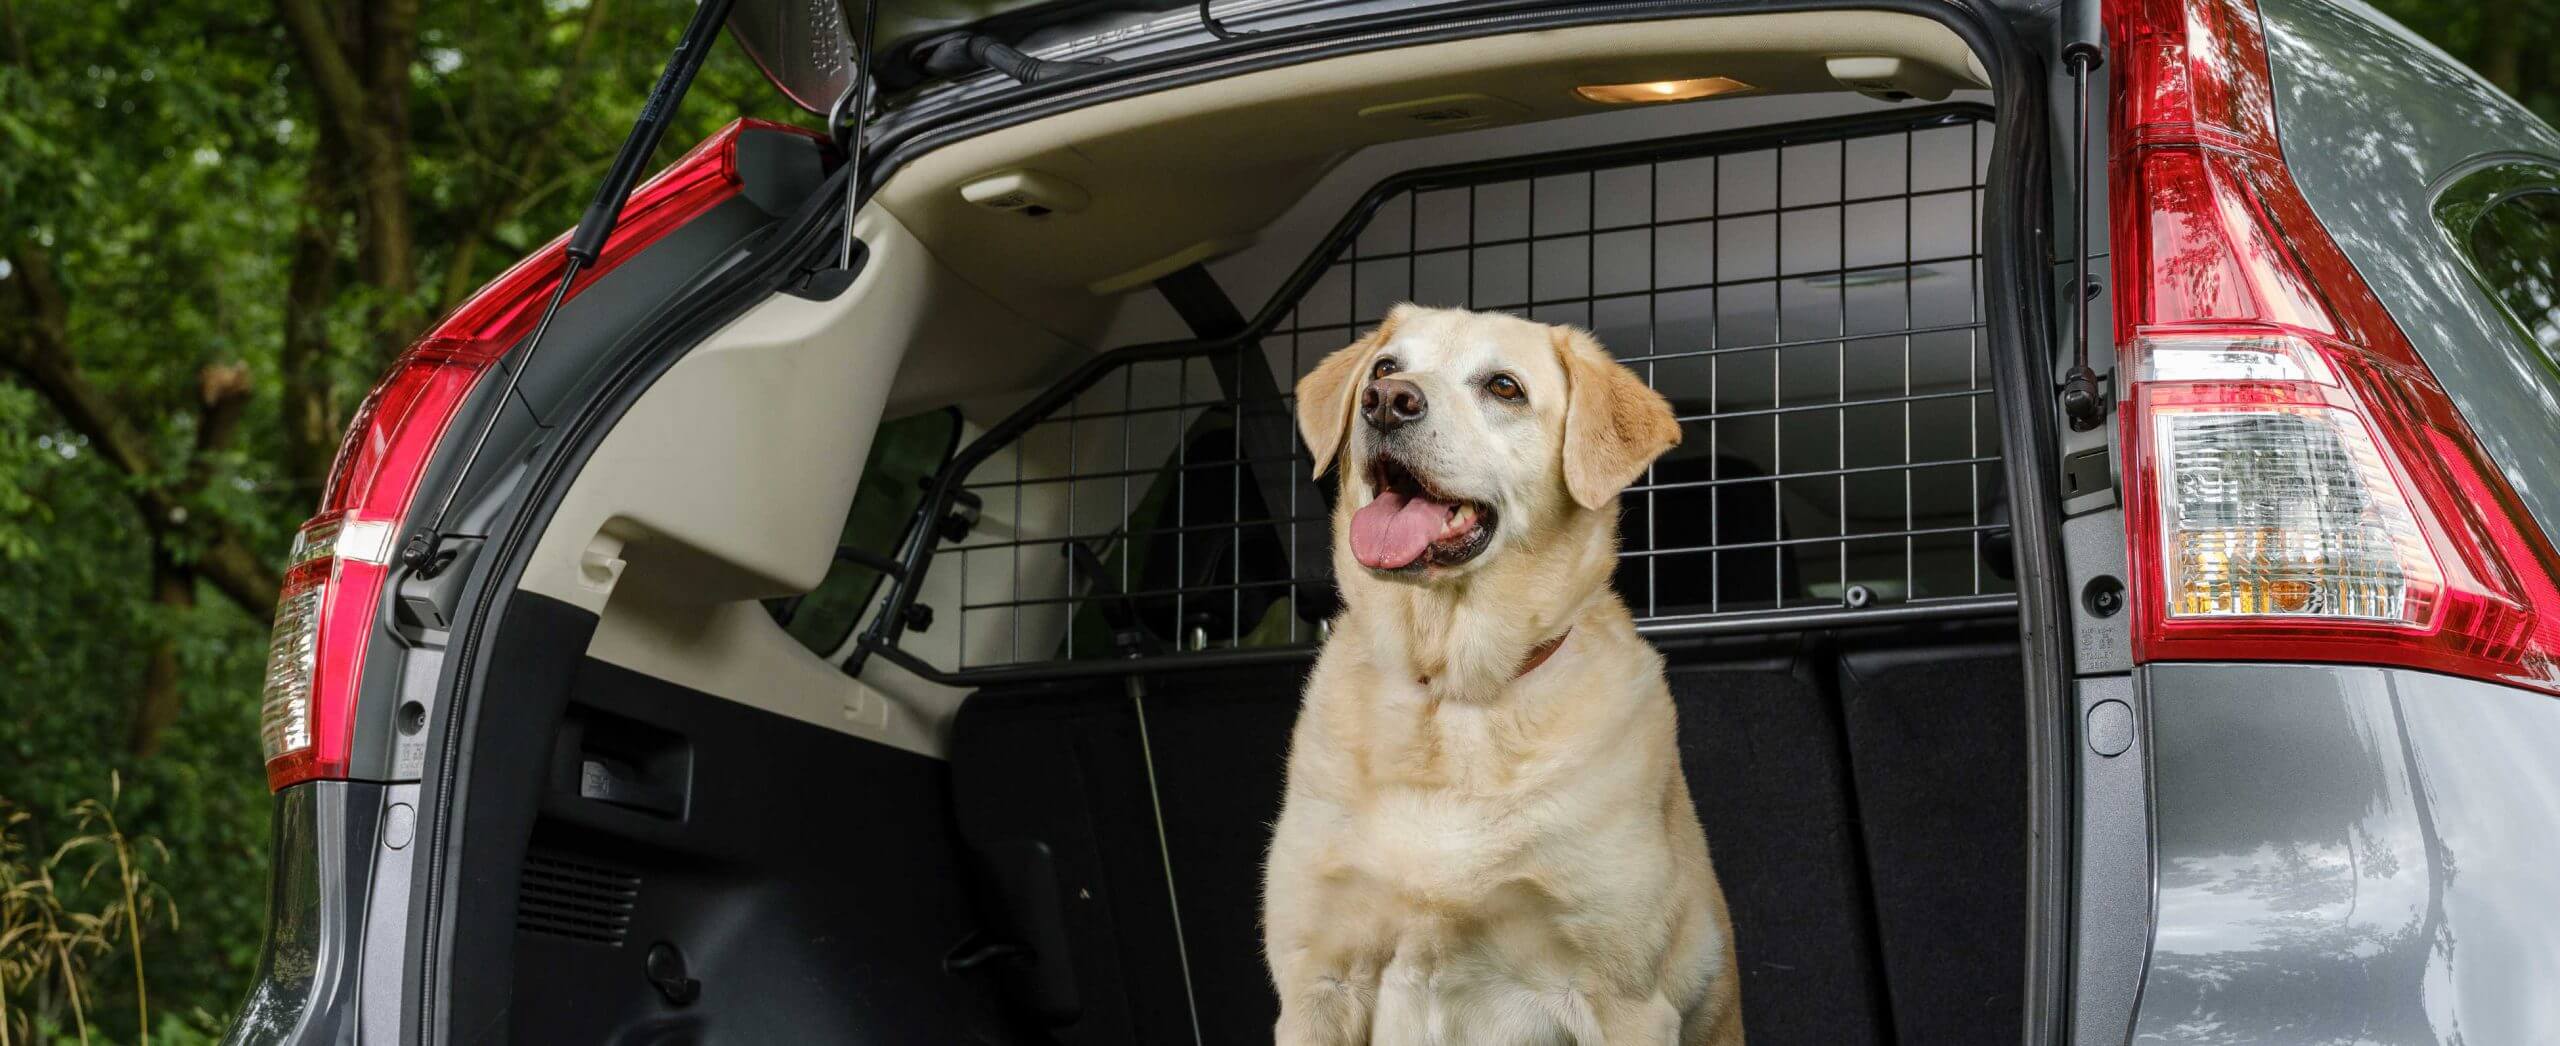 Tired of mud and paw prints? 3 easy ways to dog proof your car